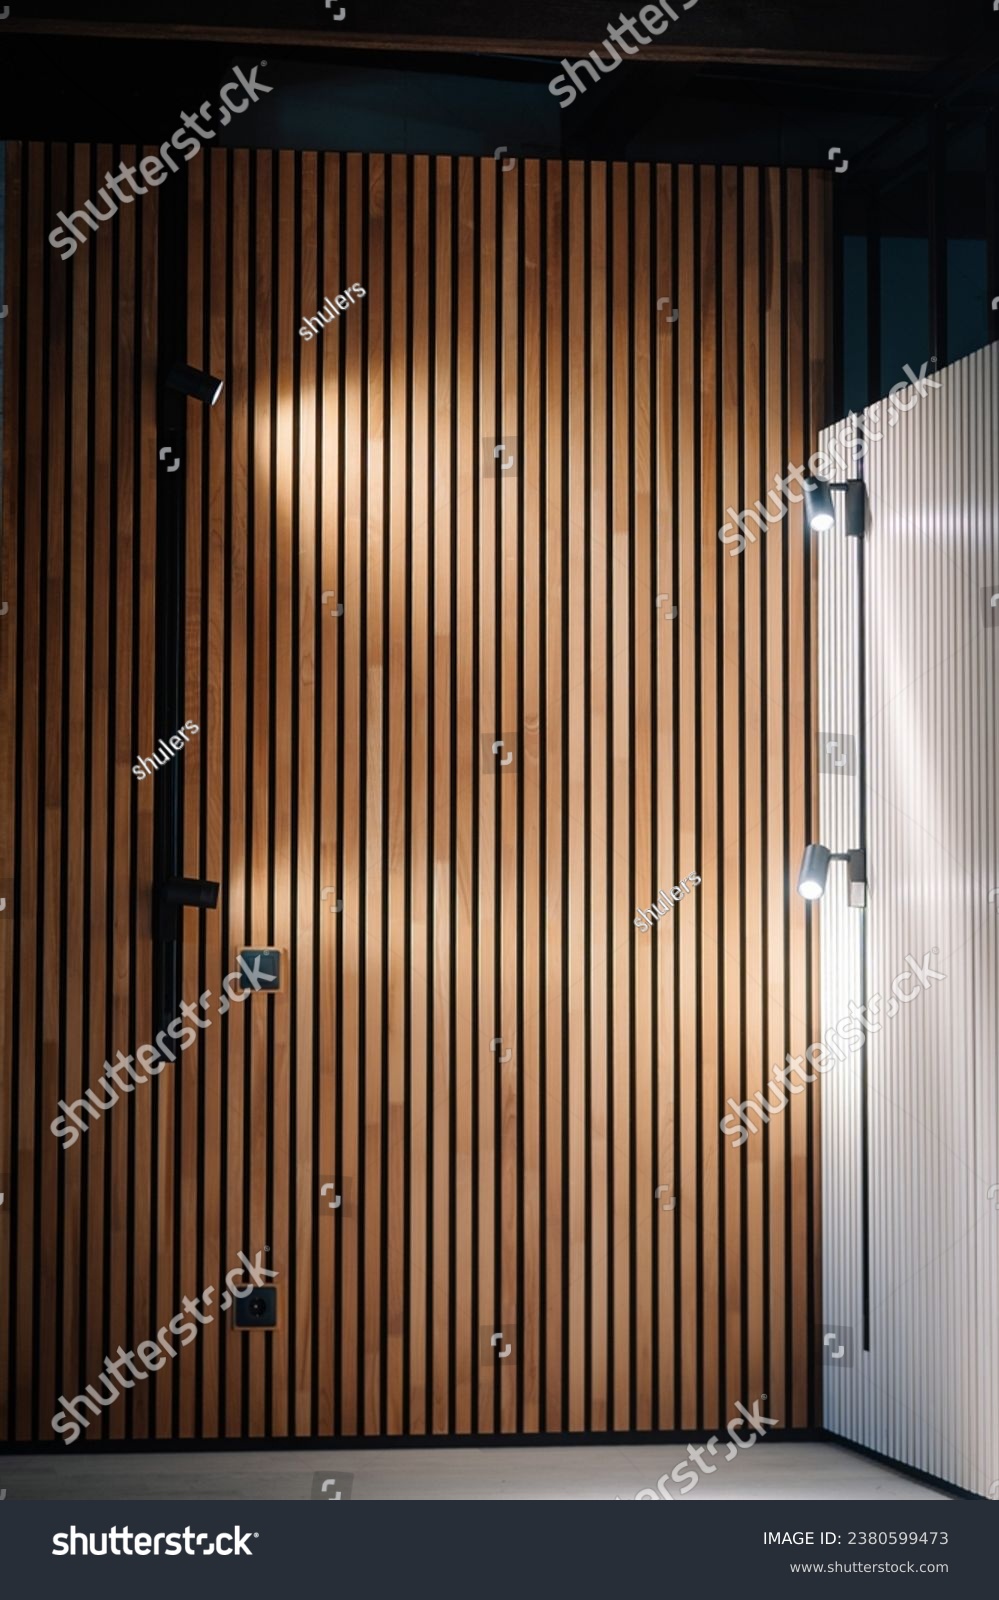 Acoustic panels background wooden beams modern background. Black outlet plug and light switch.